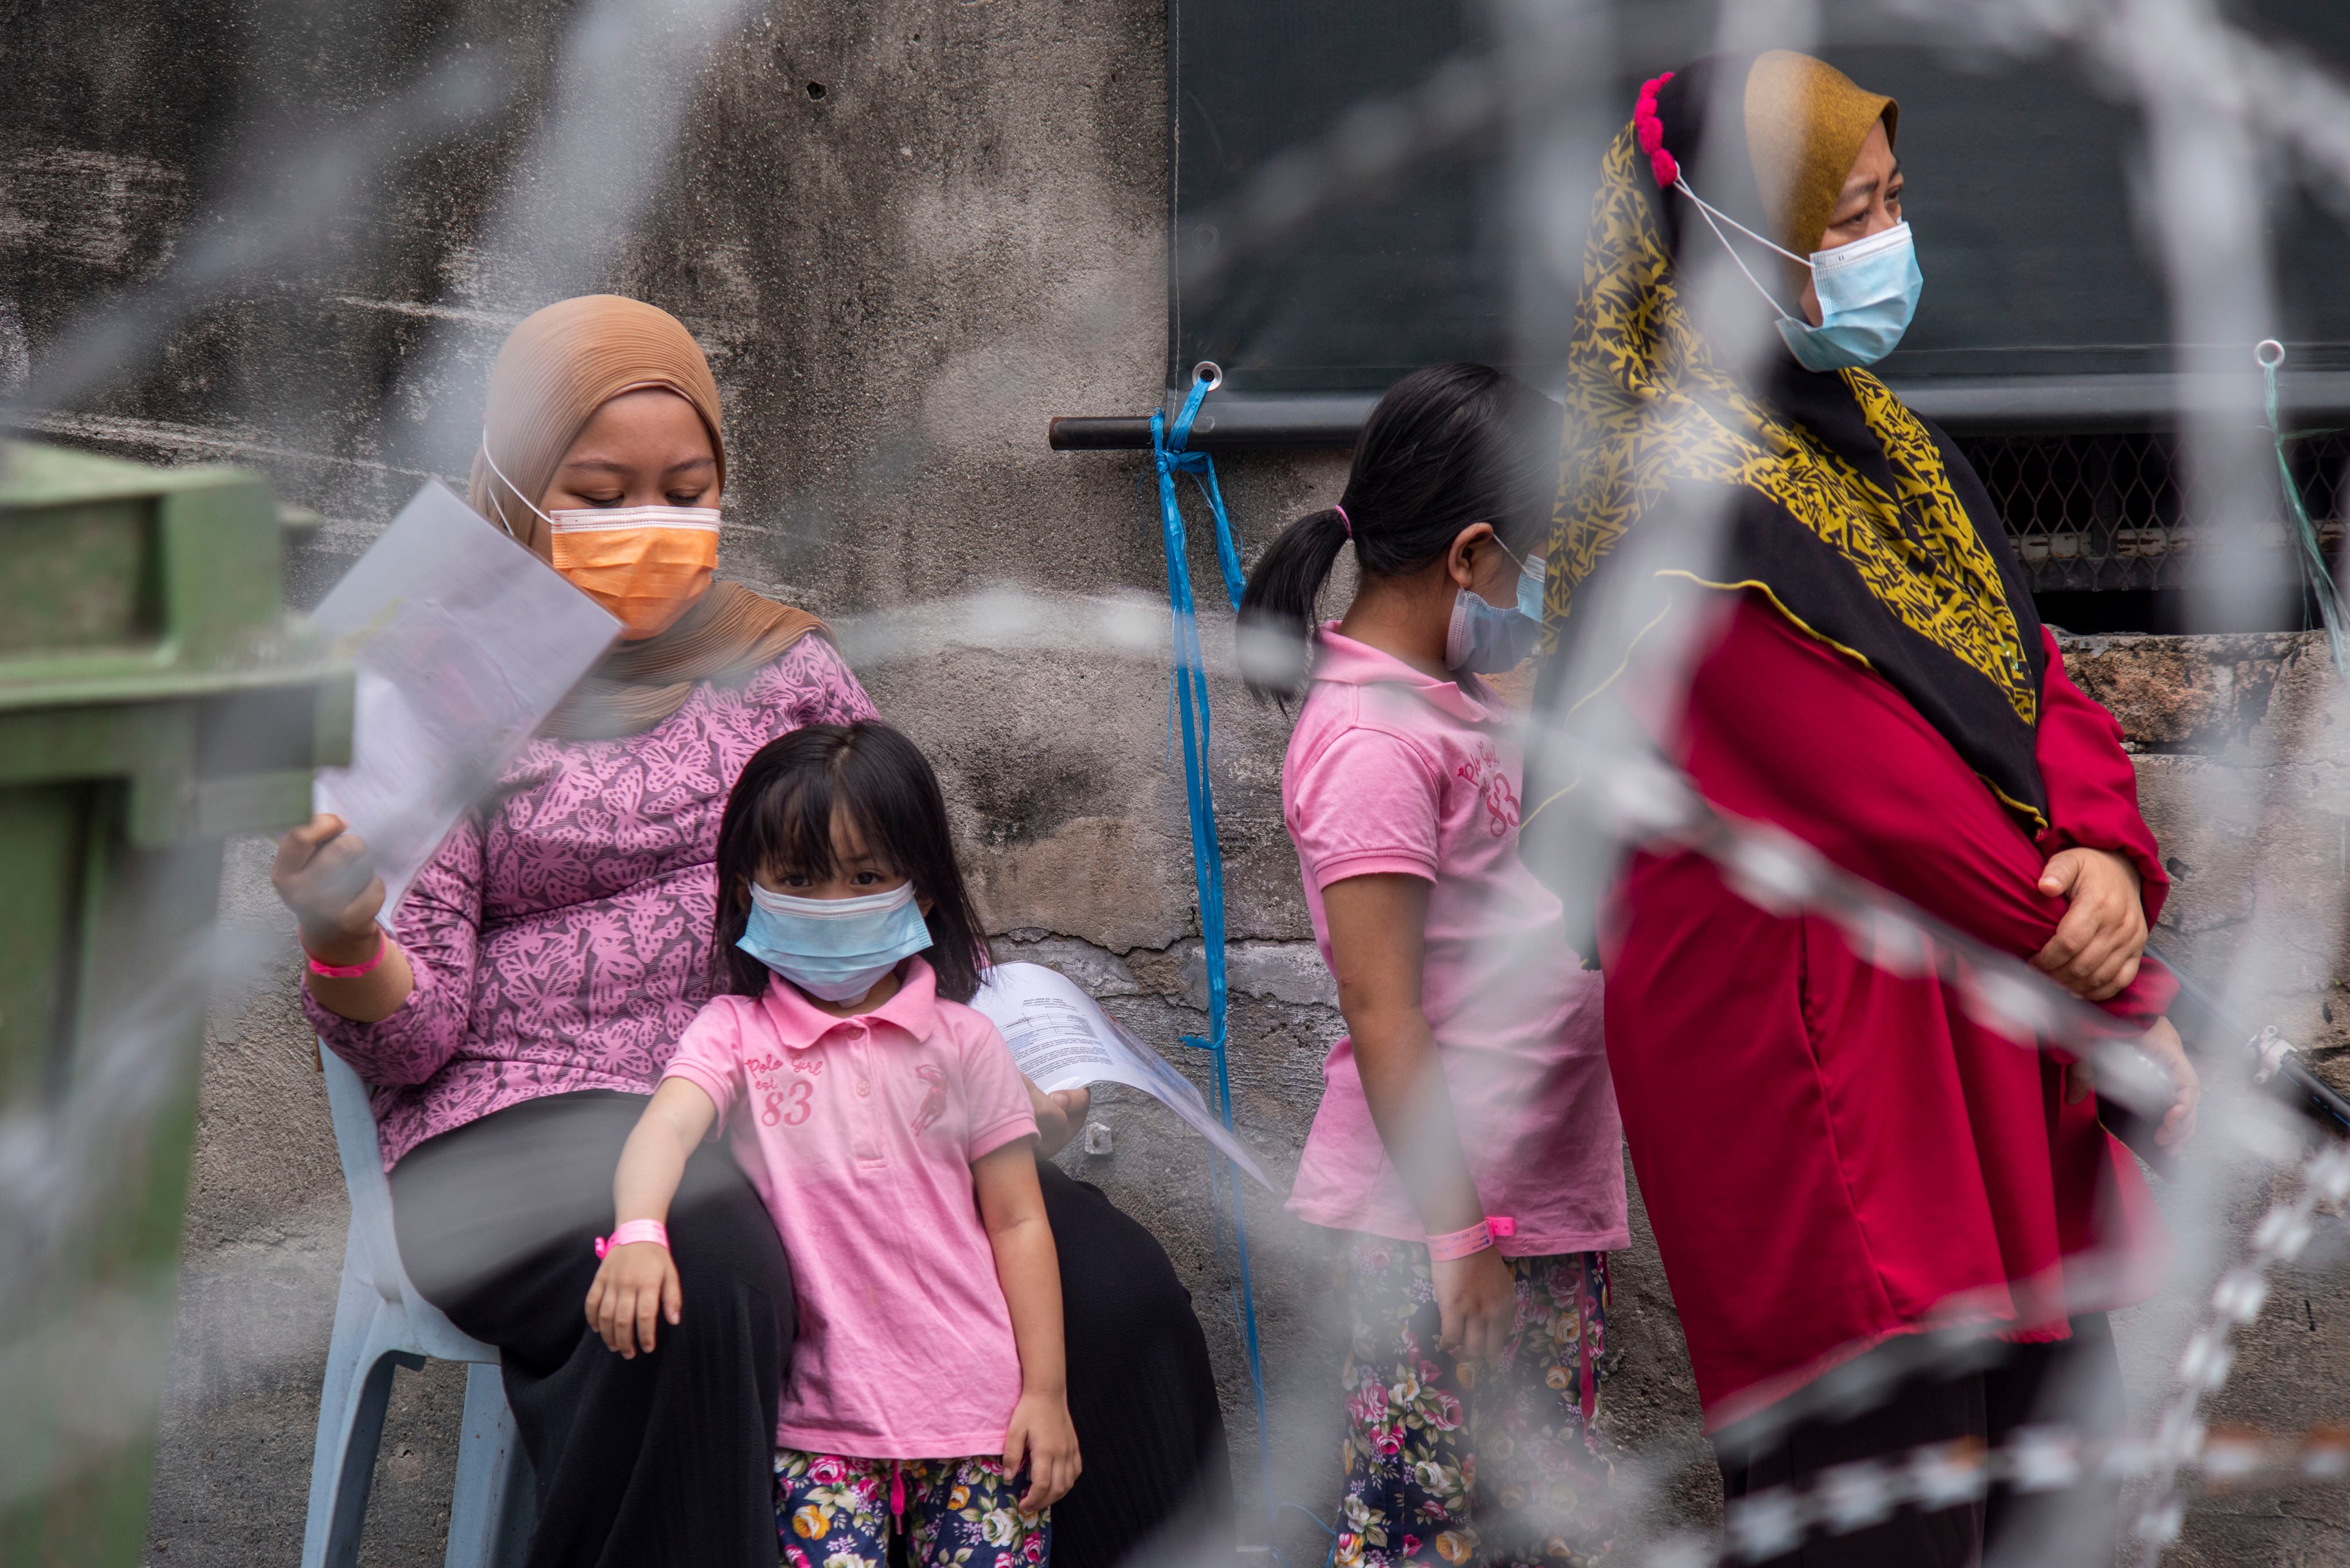 Children wait with their carers for nasal swab tests in an area of Kuala Lumpur under Covid lockdown in July 2021. The pandemic had exposed constraints on Malaysia’s mental-health professionals, the country’s health minister said. Photo: Xinhua